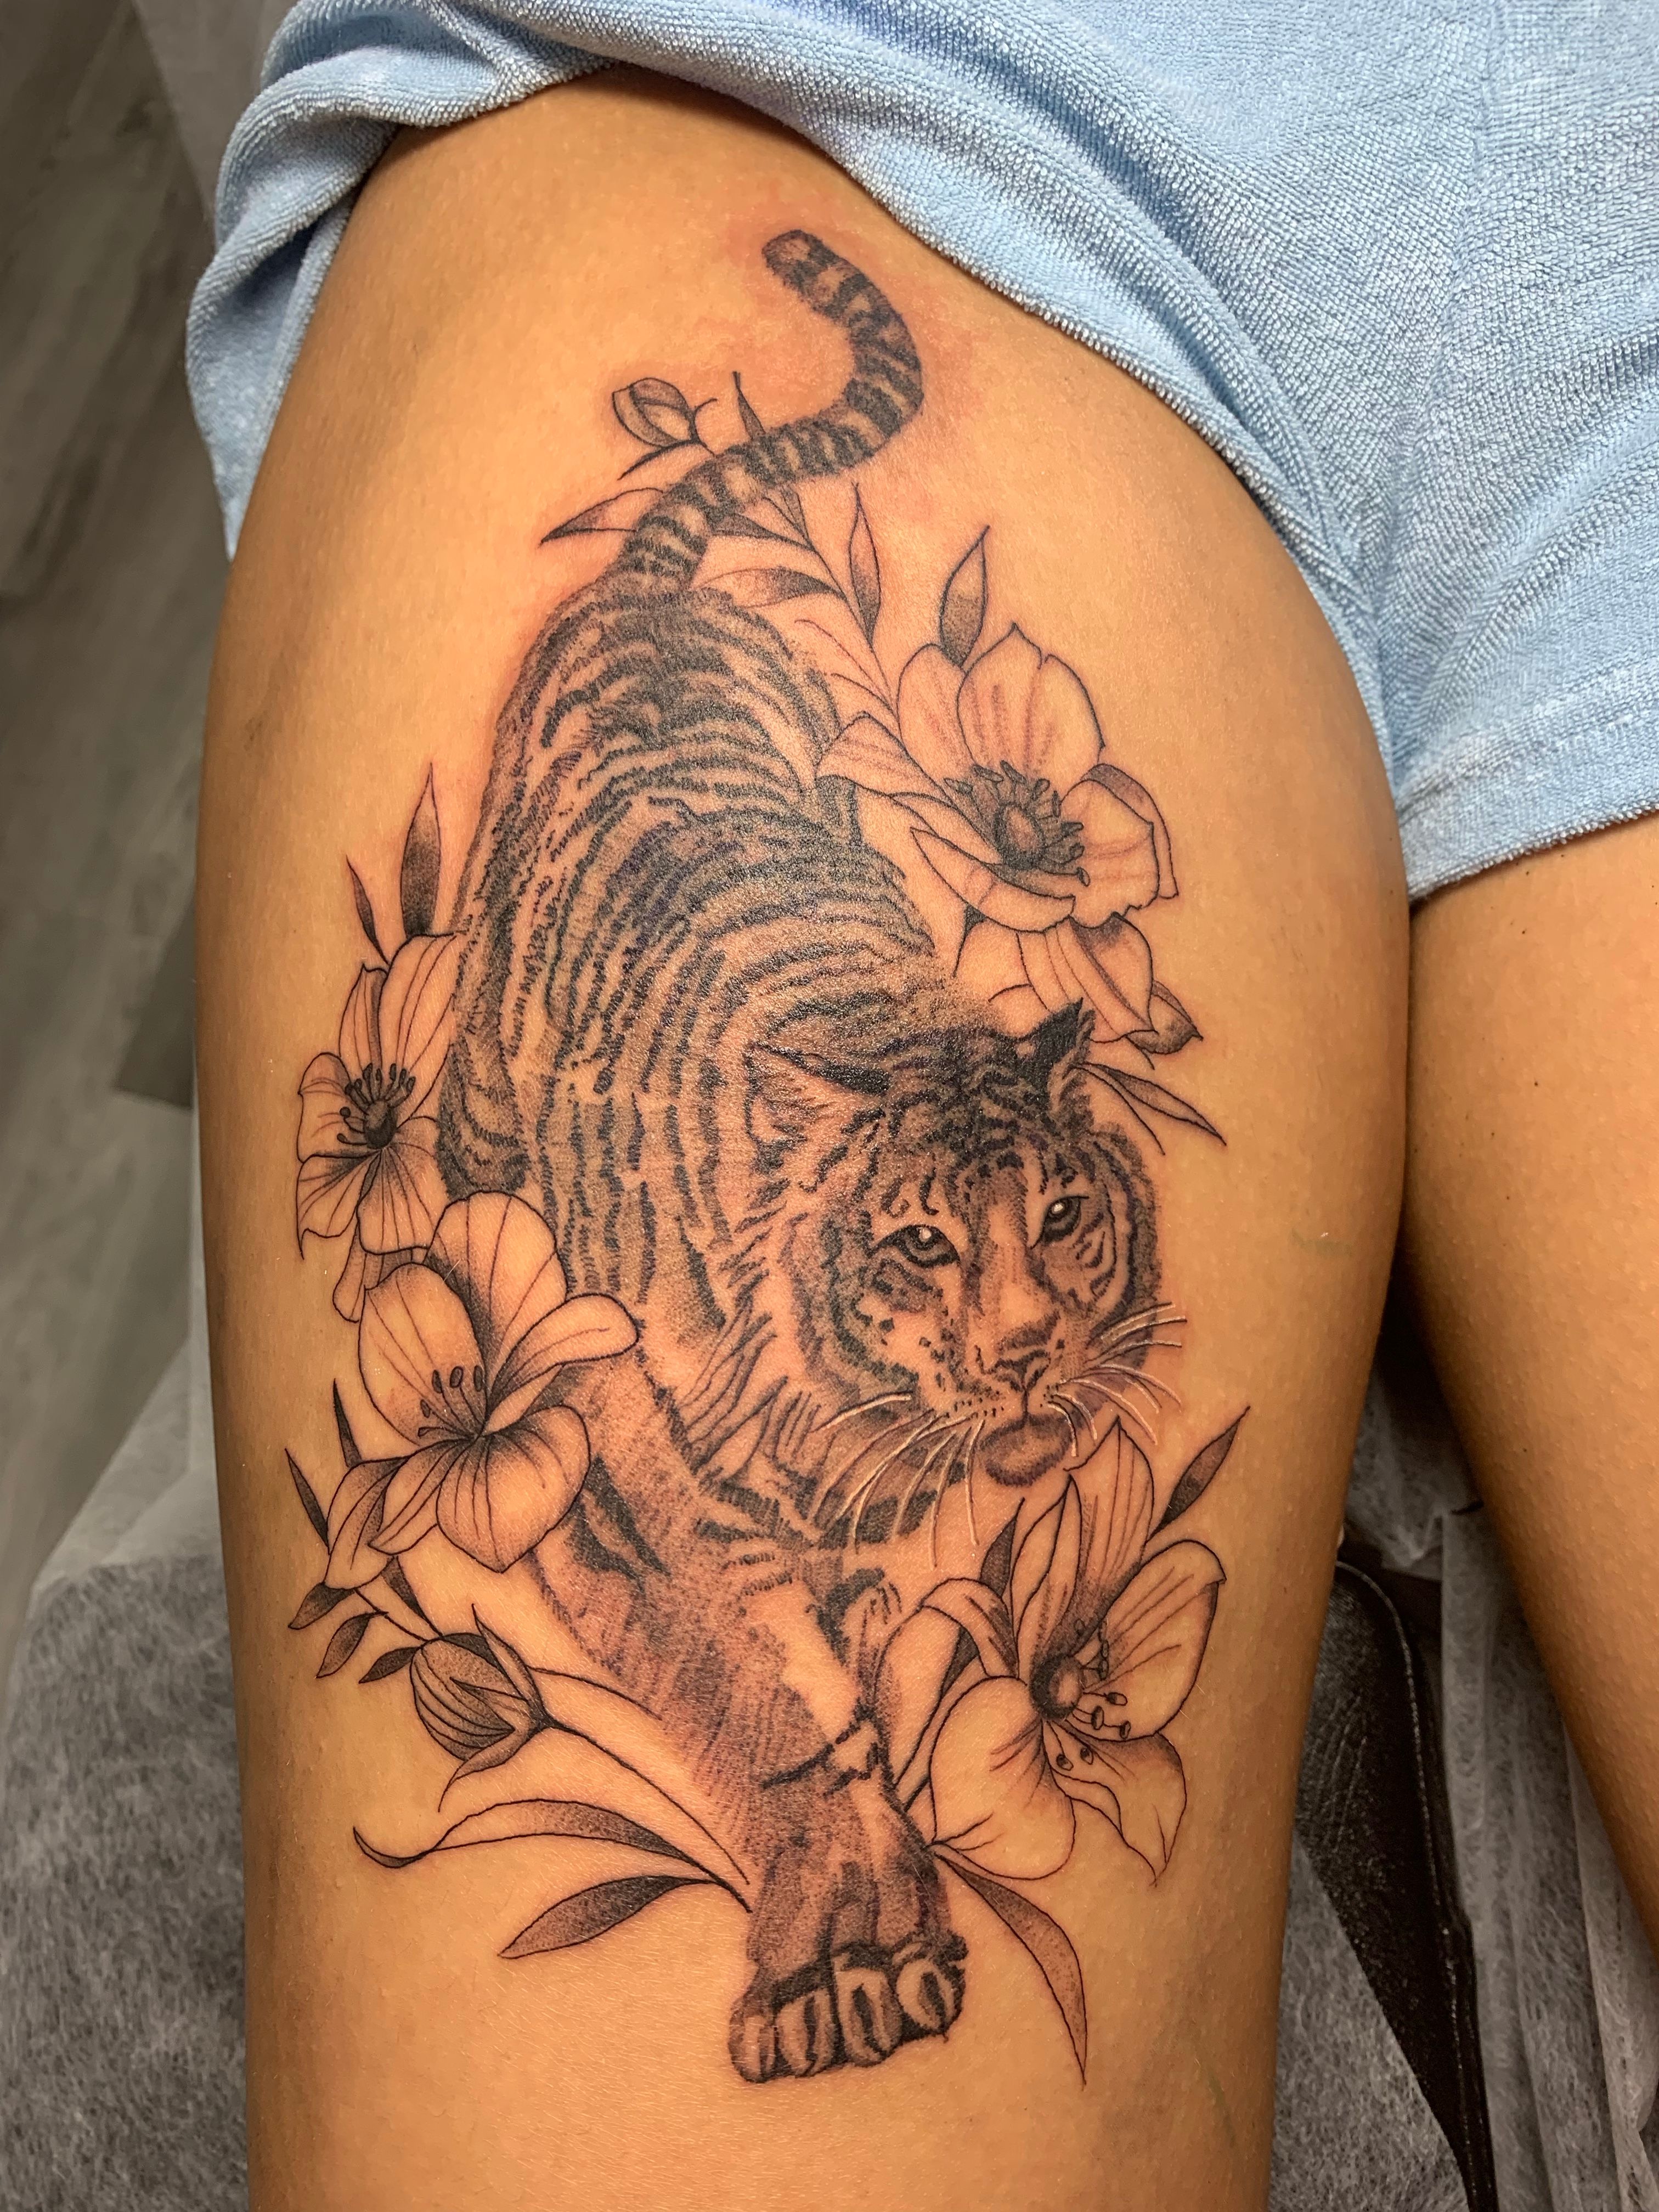 Tiger and flowers by aurum_inks : r/TattooDesigns